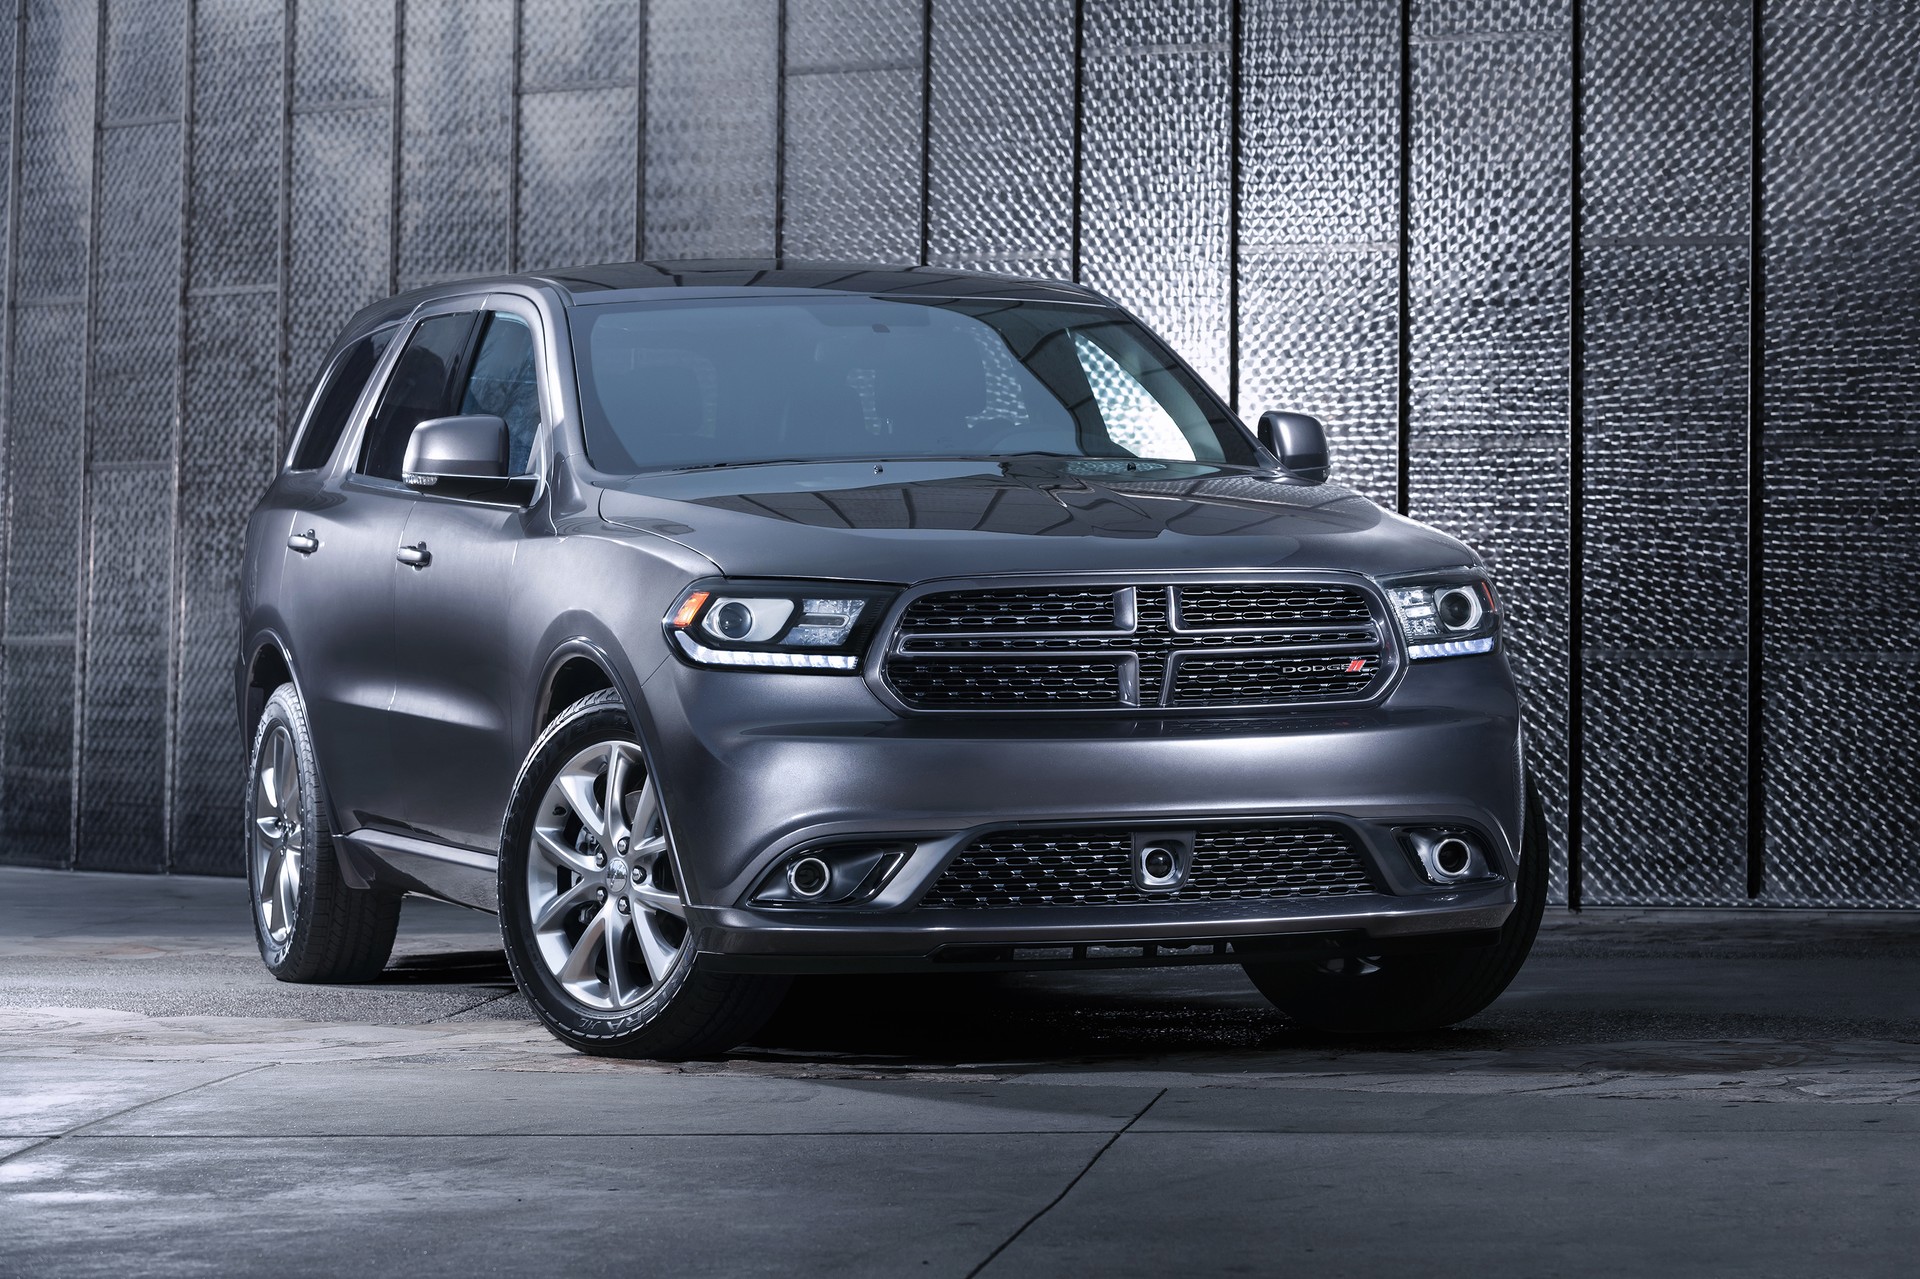 2015 Dodge Durango Review Ratings Specs Prices And